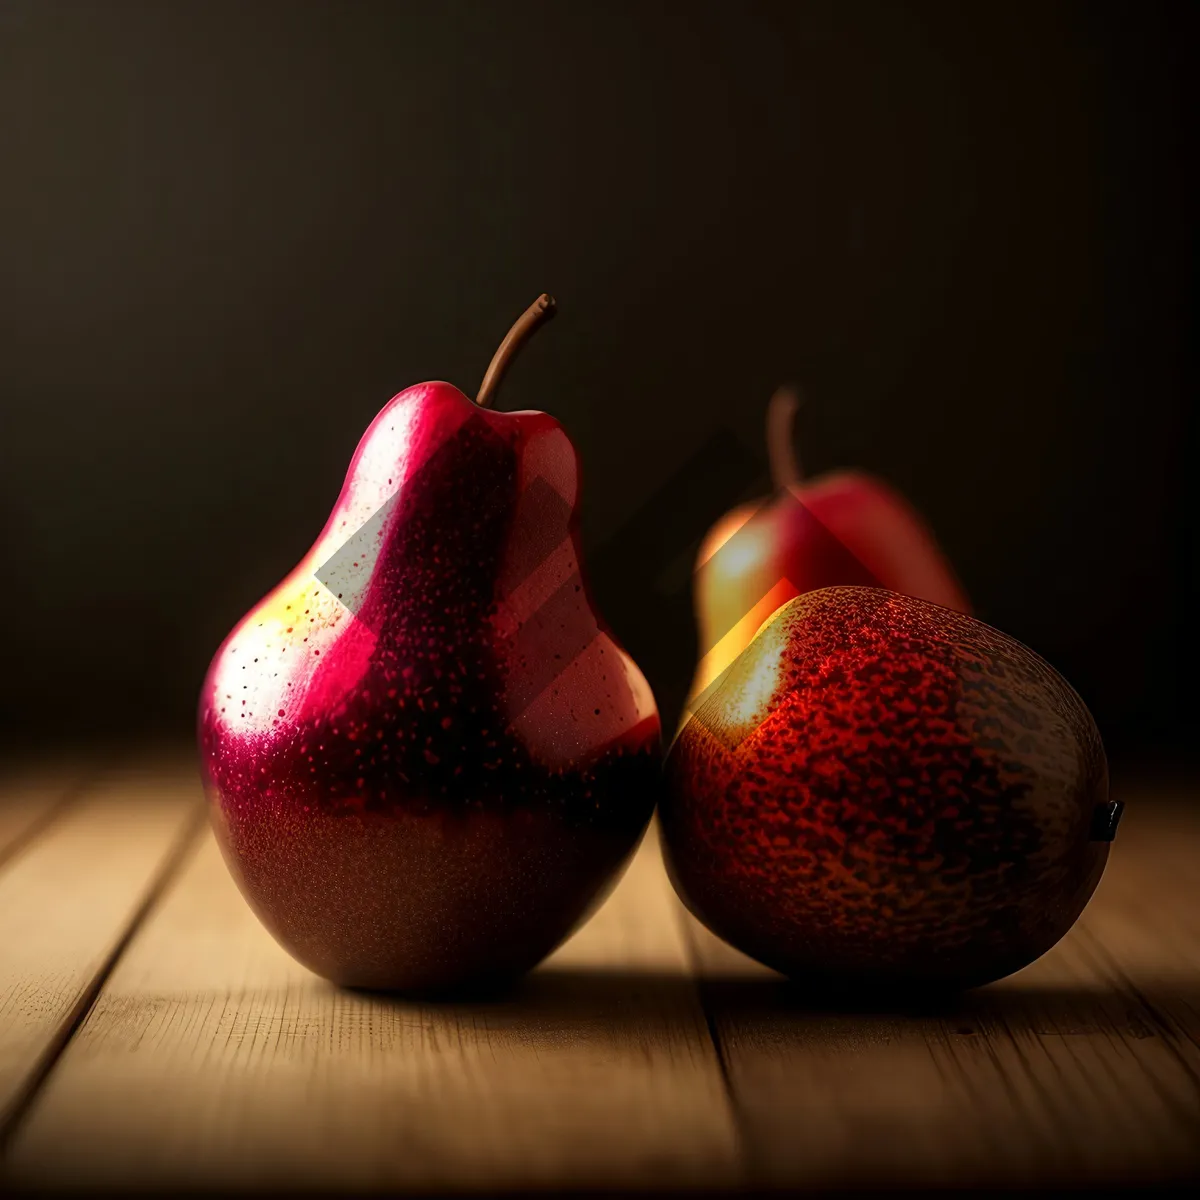 Picture of Fresh and Juicy Pear - Healthy and Tasty Fruit Image